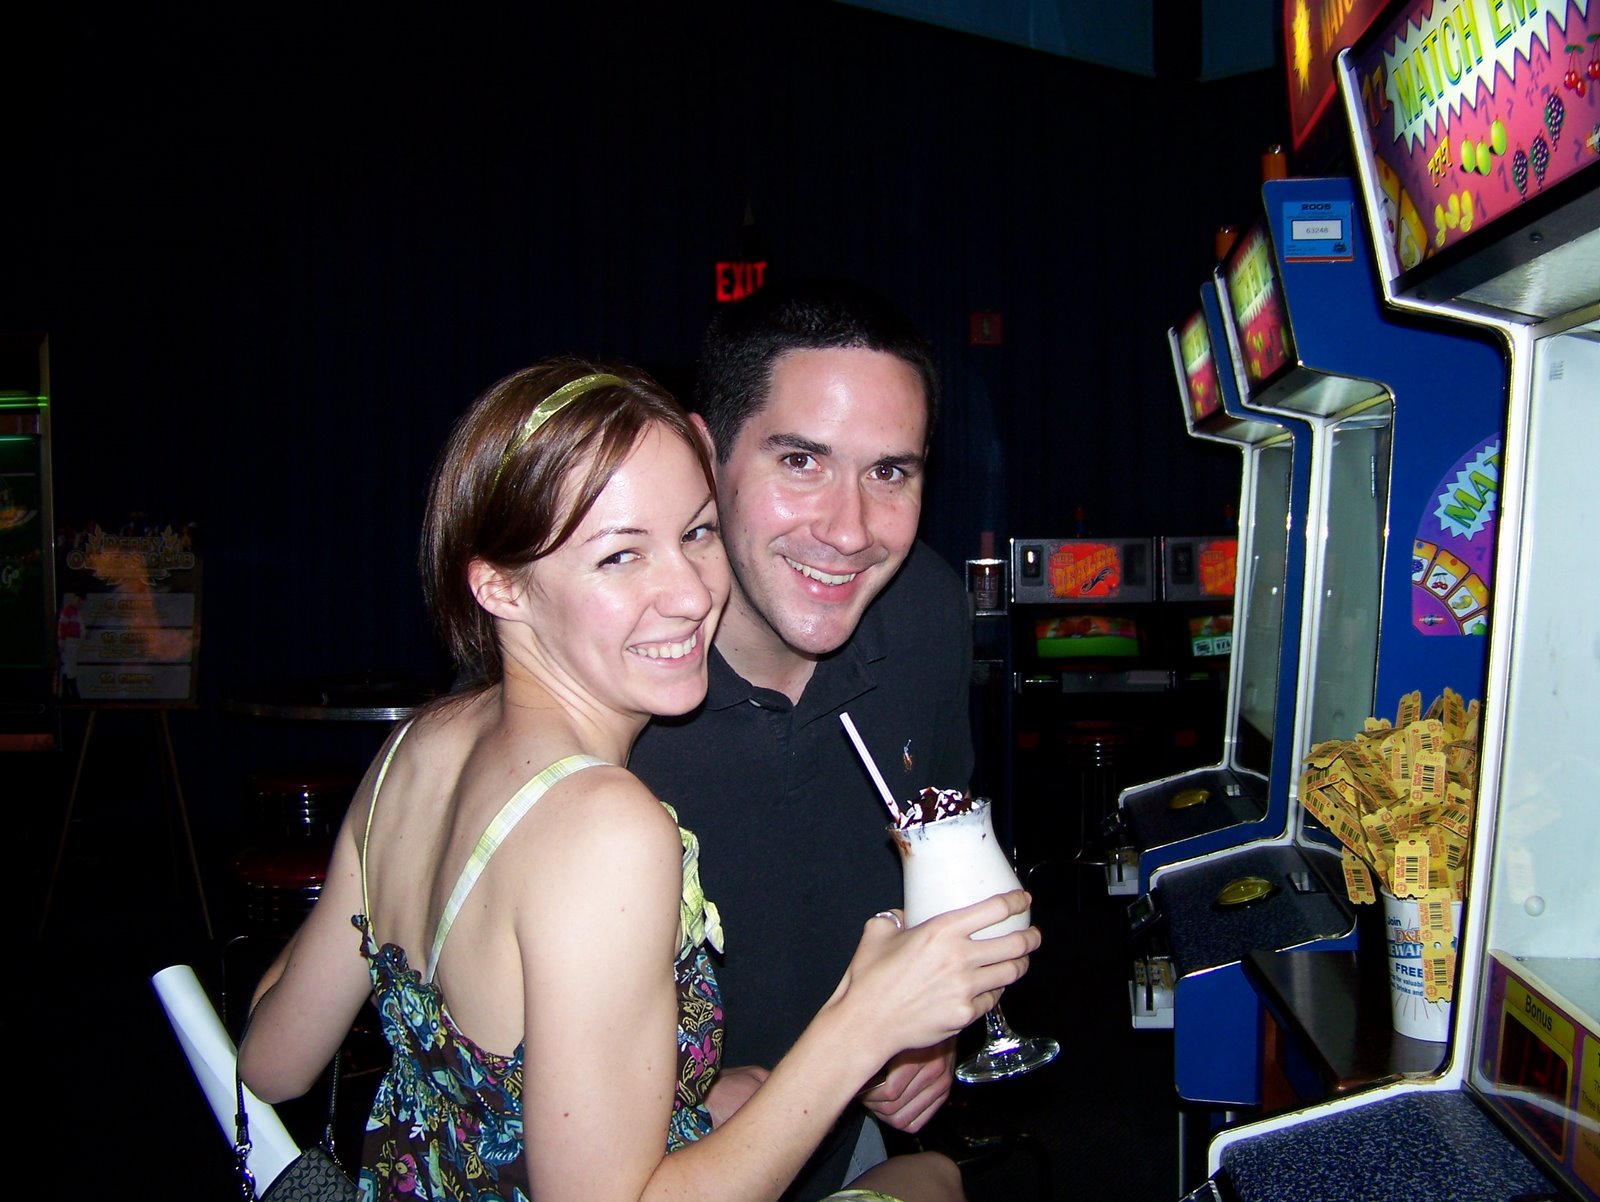 [Dave+and+Busters+034.jpg]